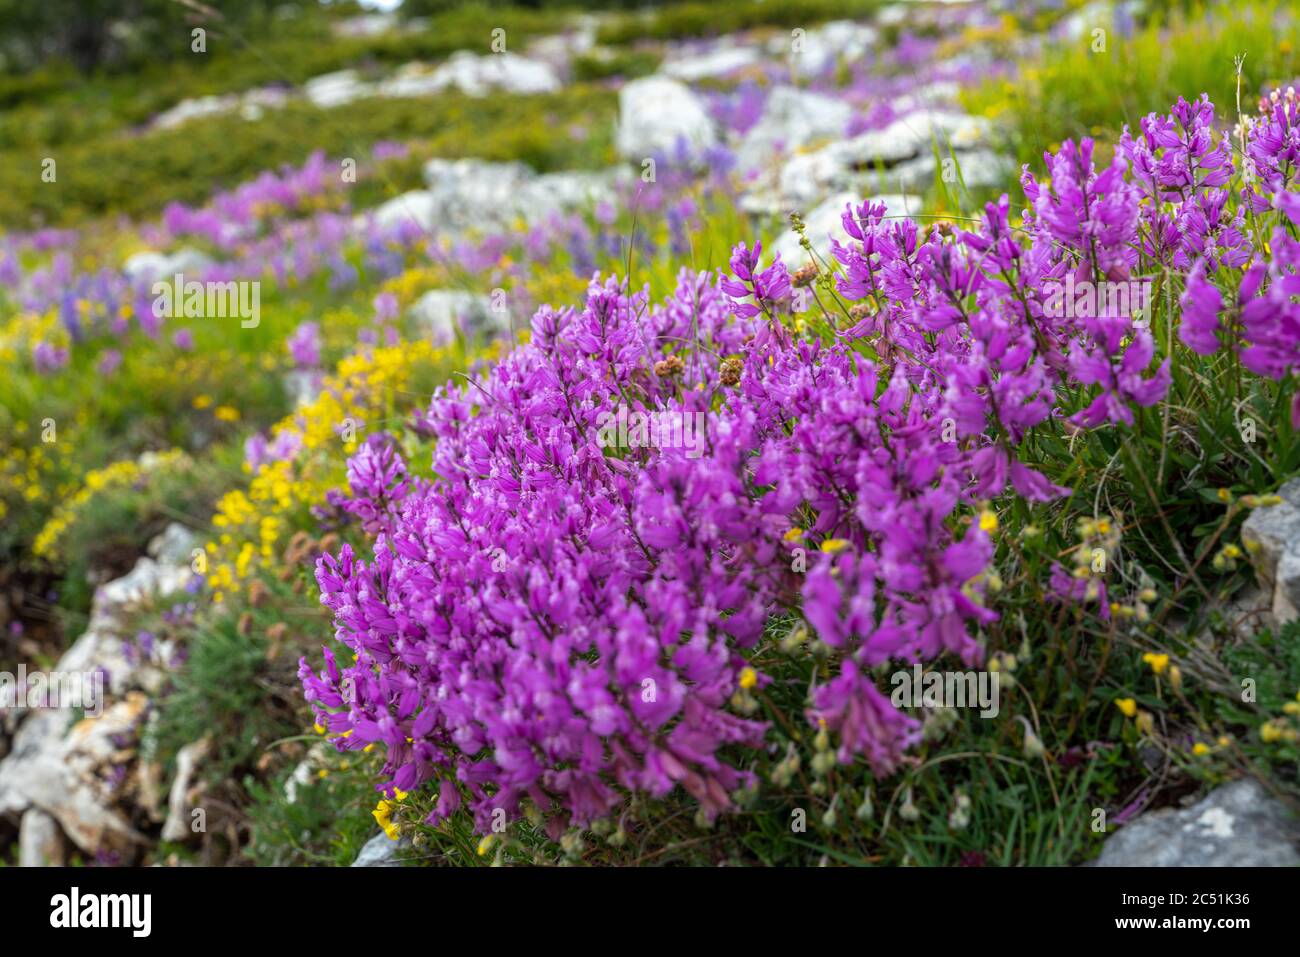 At the beginning of summer, large bushes of Greater polygala color the plain of Campo Imperatore.Gran Sasso and Monti della Laga National Park,Abruzzo Stock Photo